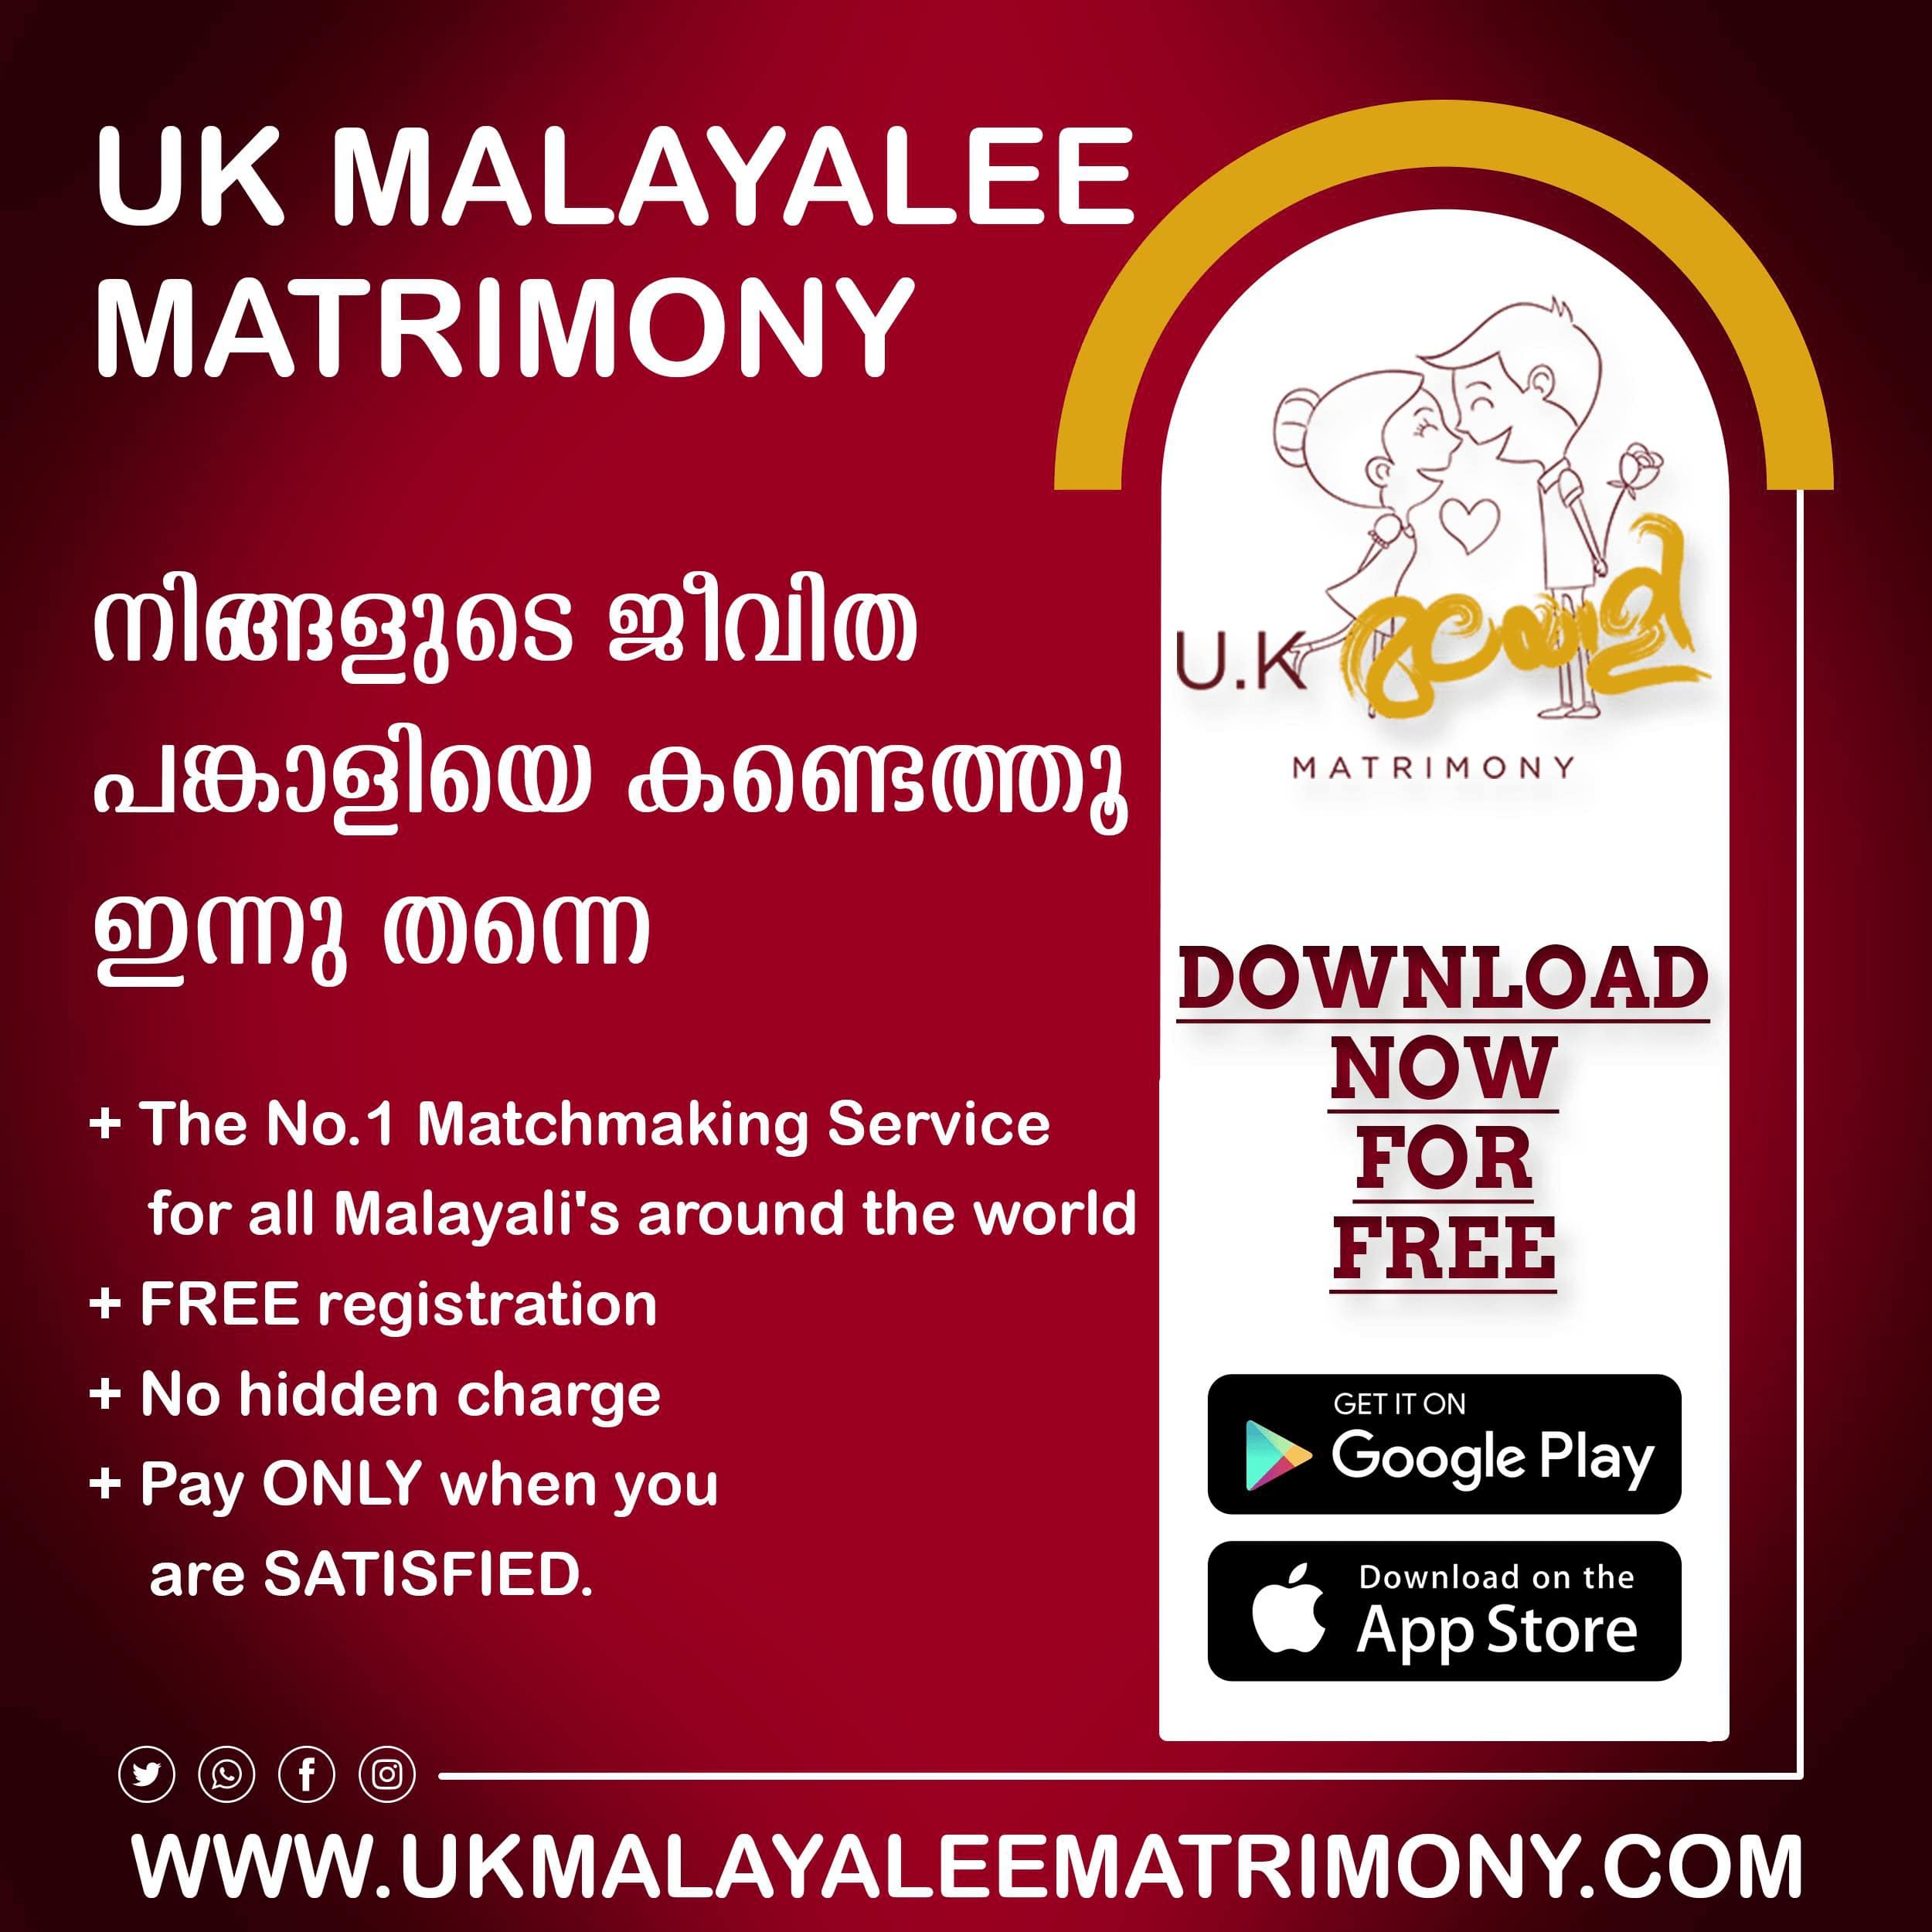 Register now for free with Europe Malayali Matrimony